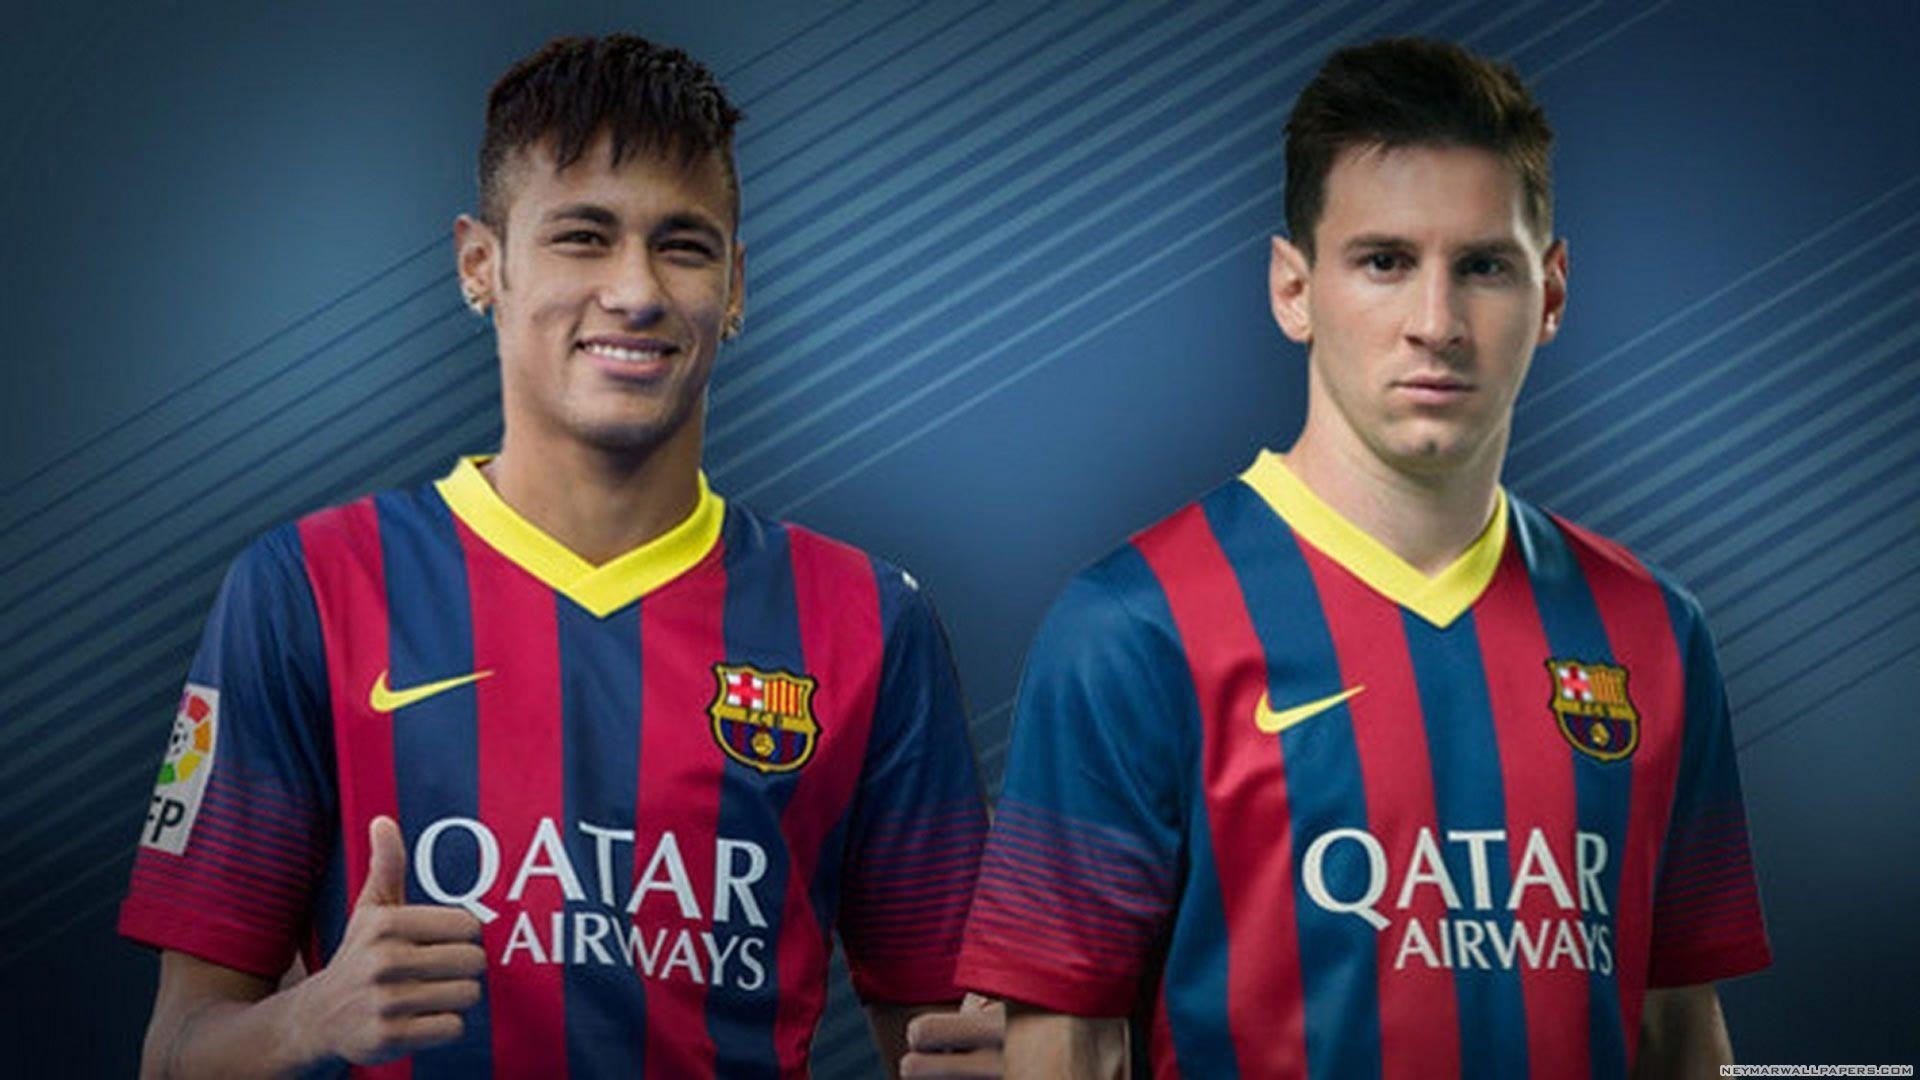 messi and neymar wallpapers - wallpaper cave